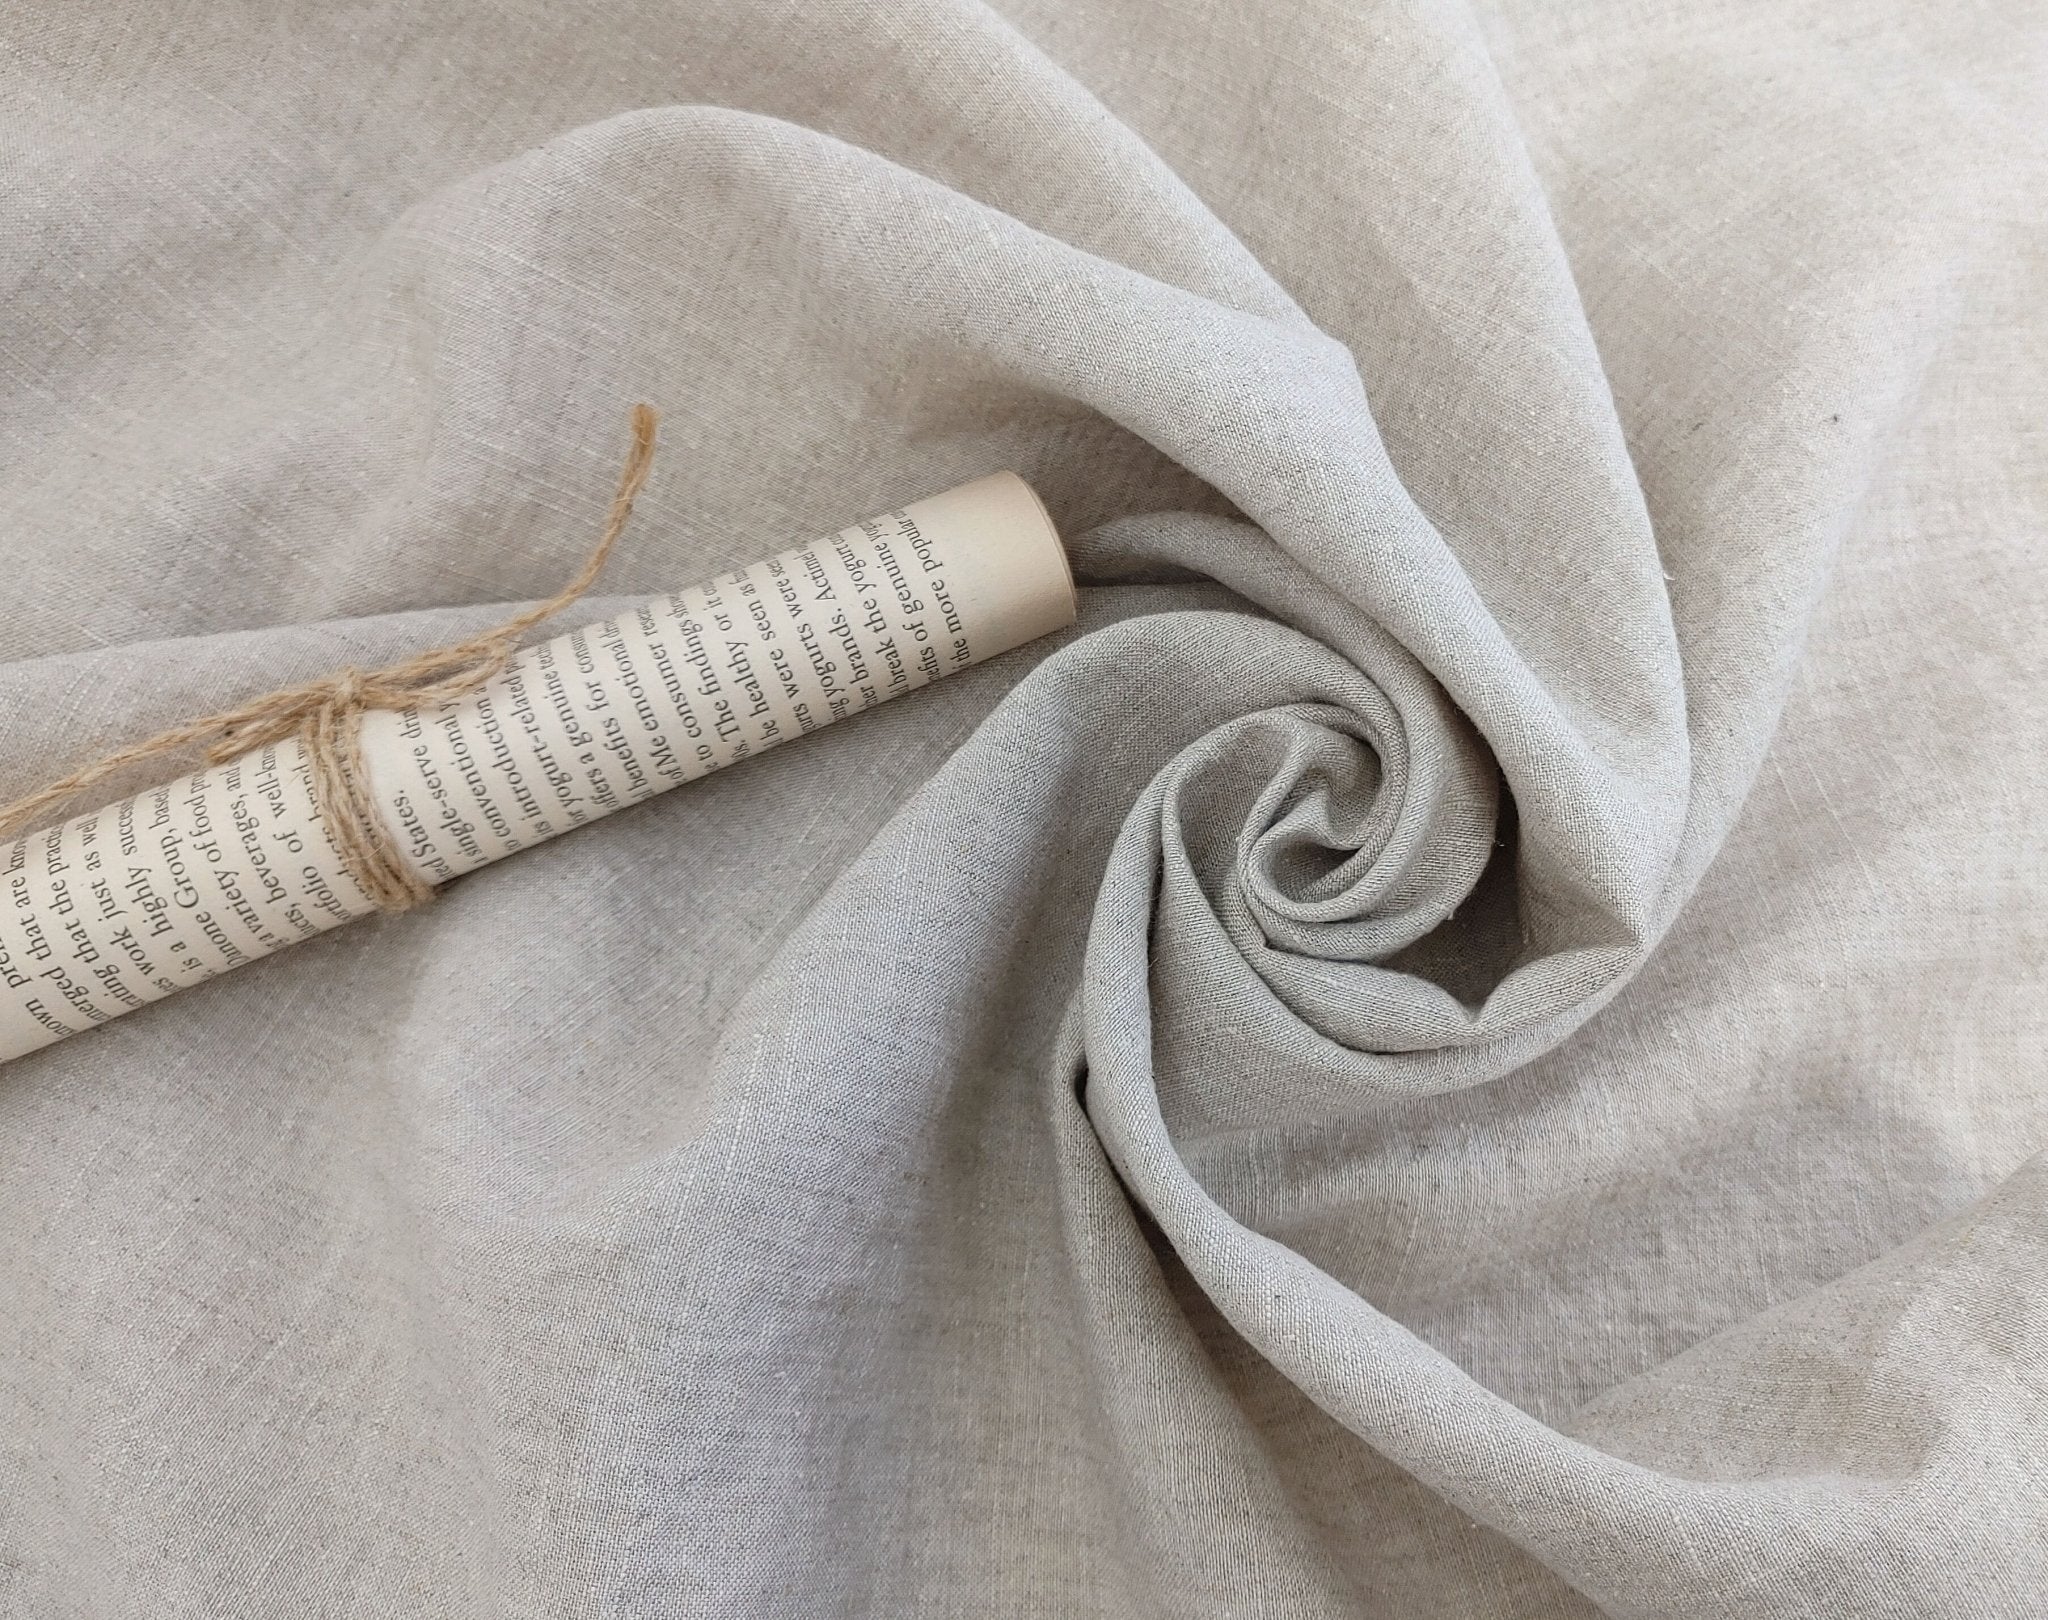 Vintage Dyed Medium Weight Linen Ramie Cotton Fabric with Plain Weave 7820 7771 7770 - The Linen Lab - Grey